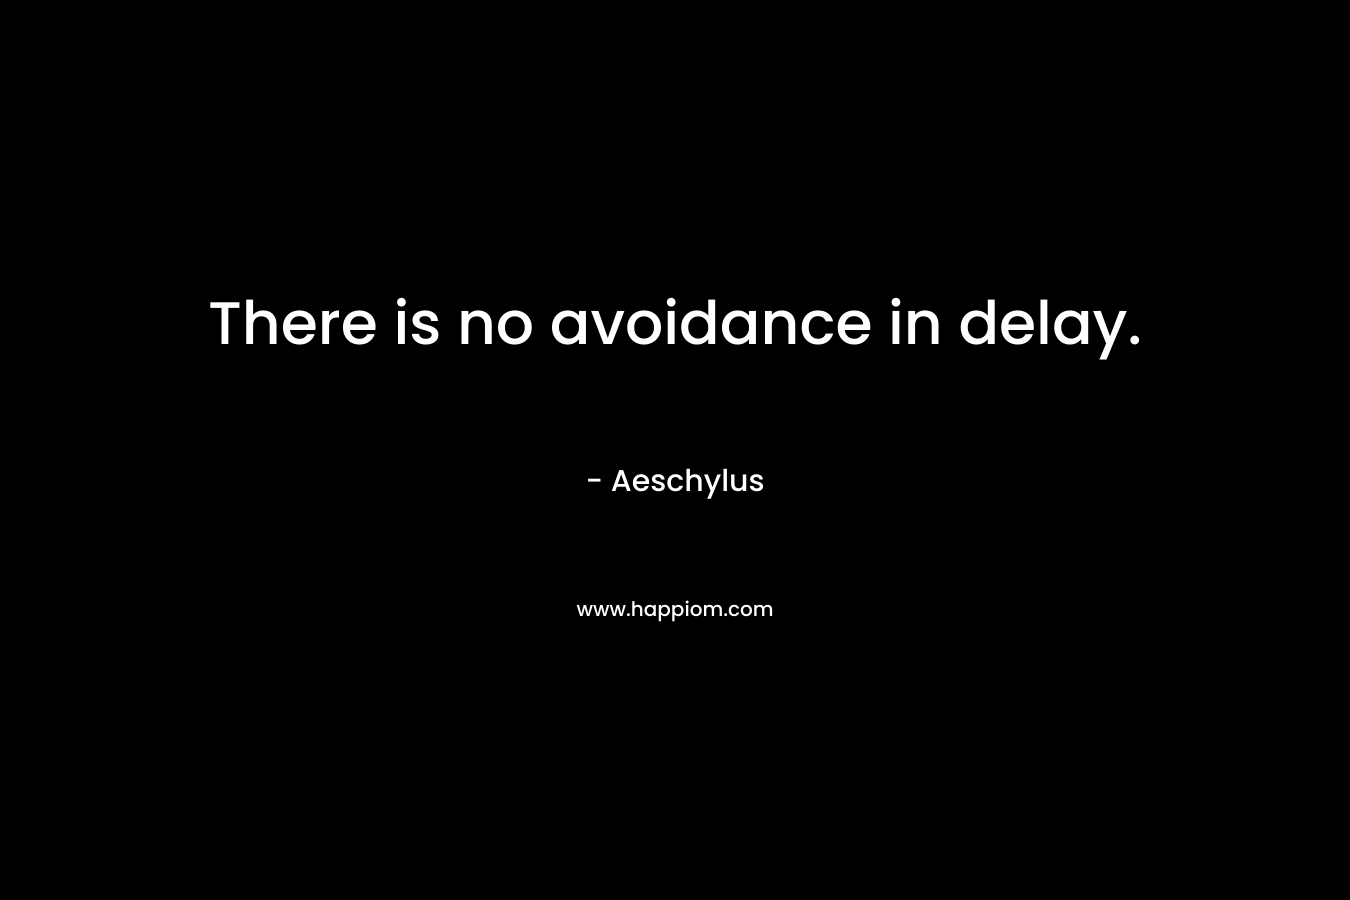 There is no avoidance in delay. – Aeschylus